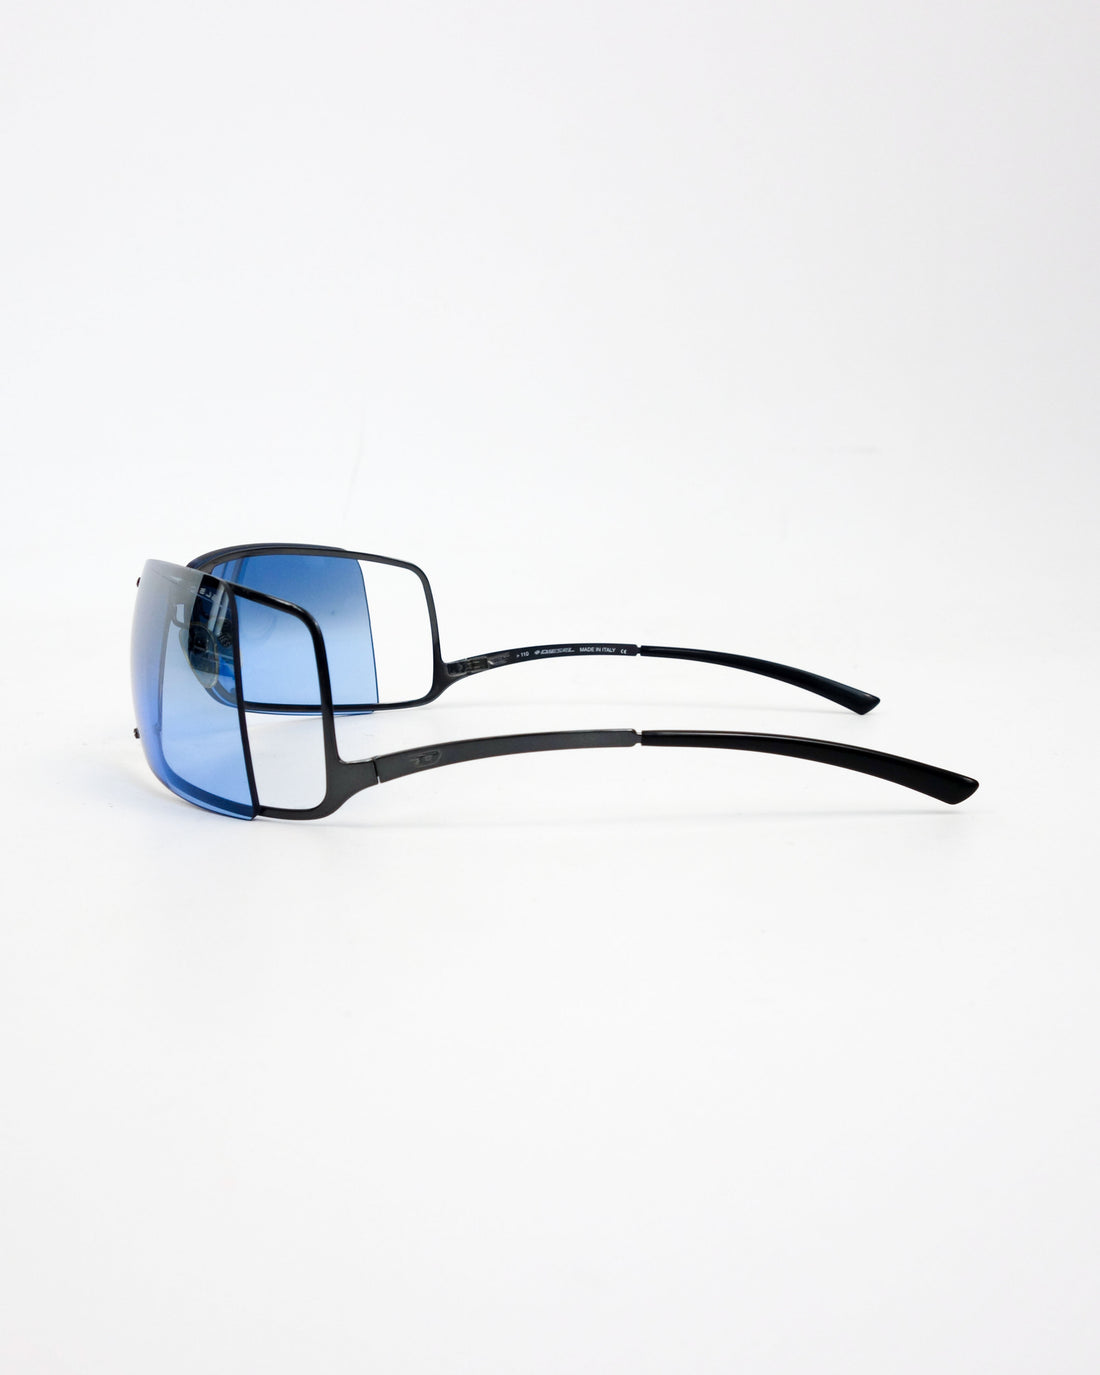 Diesel Cold-Frame Blue Smoked Sunglasses 2000's